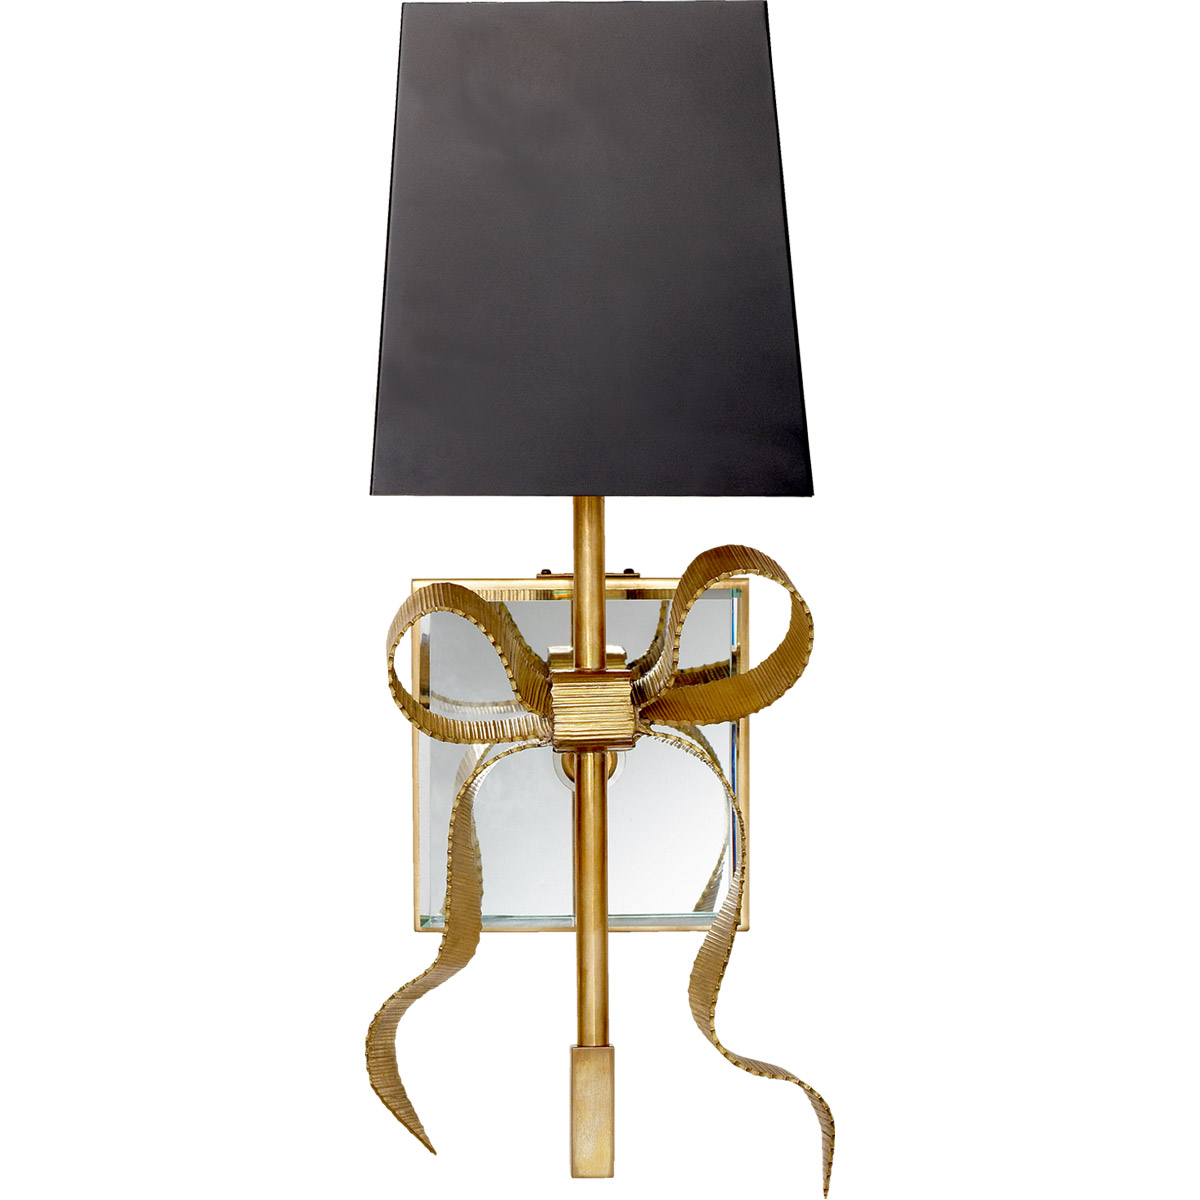 Visual Comfort Signature Collection | Visual Light Black, inch in new Comfort 1 Bow Gros-Grain york Wall Light 5 Ellery kate KS2008SB-B Soft Brass spade Sconce Matte Small